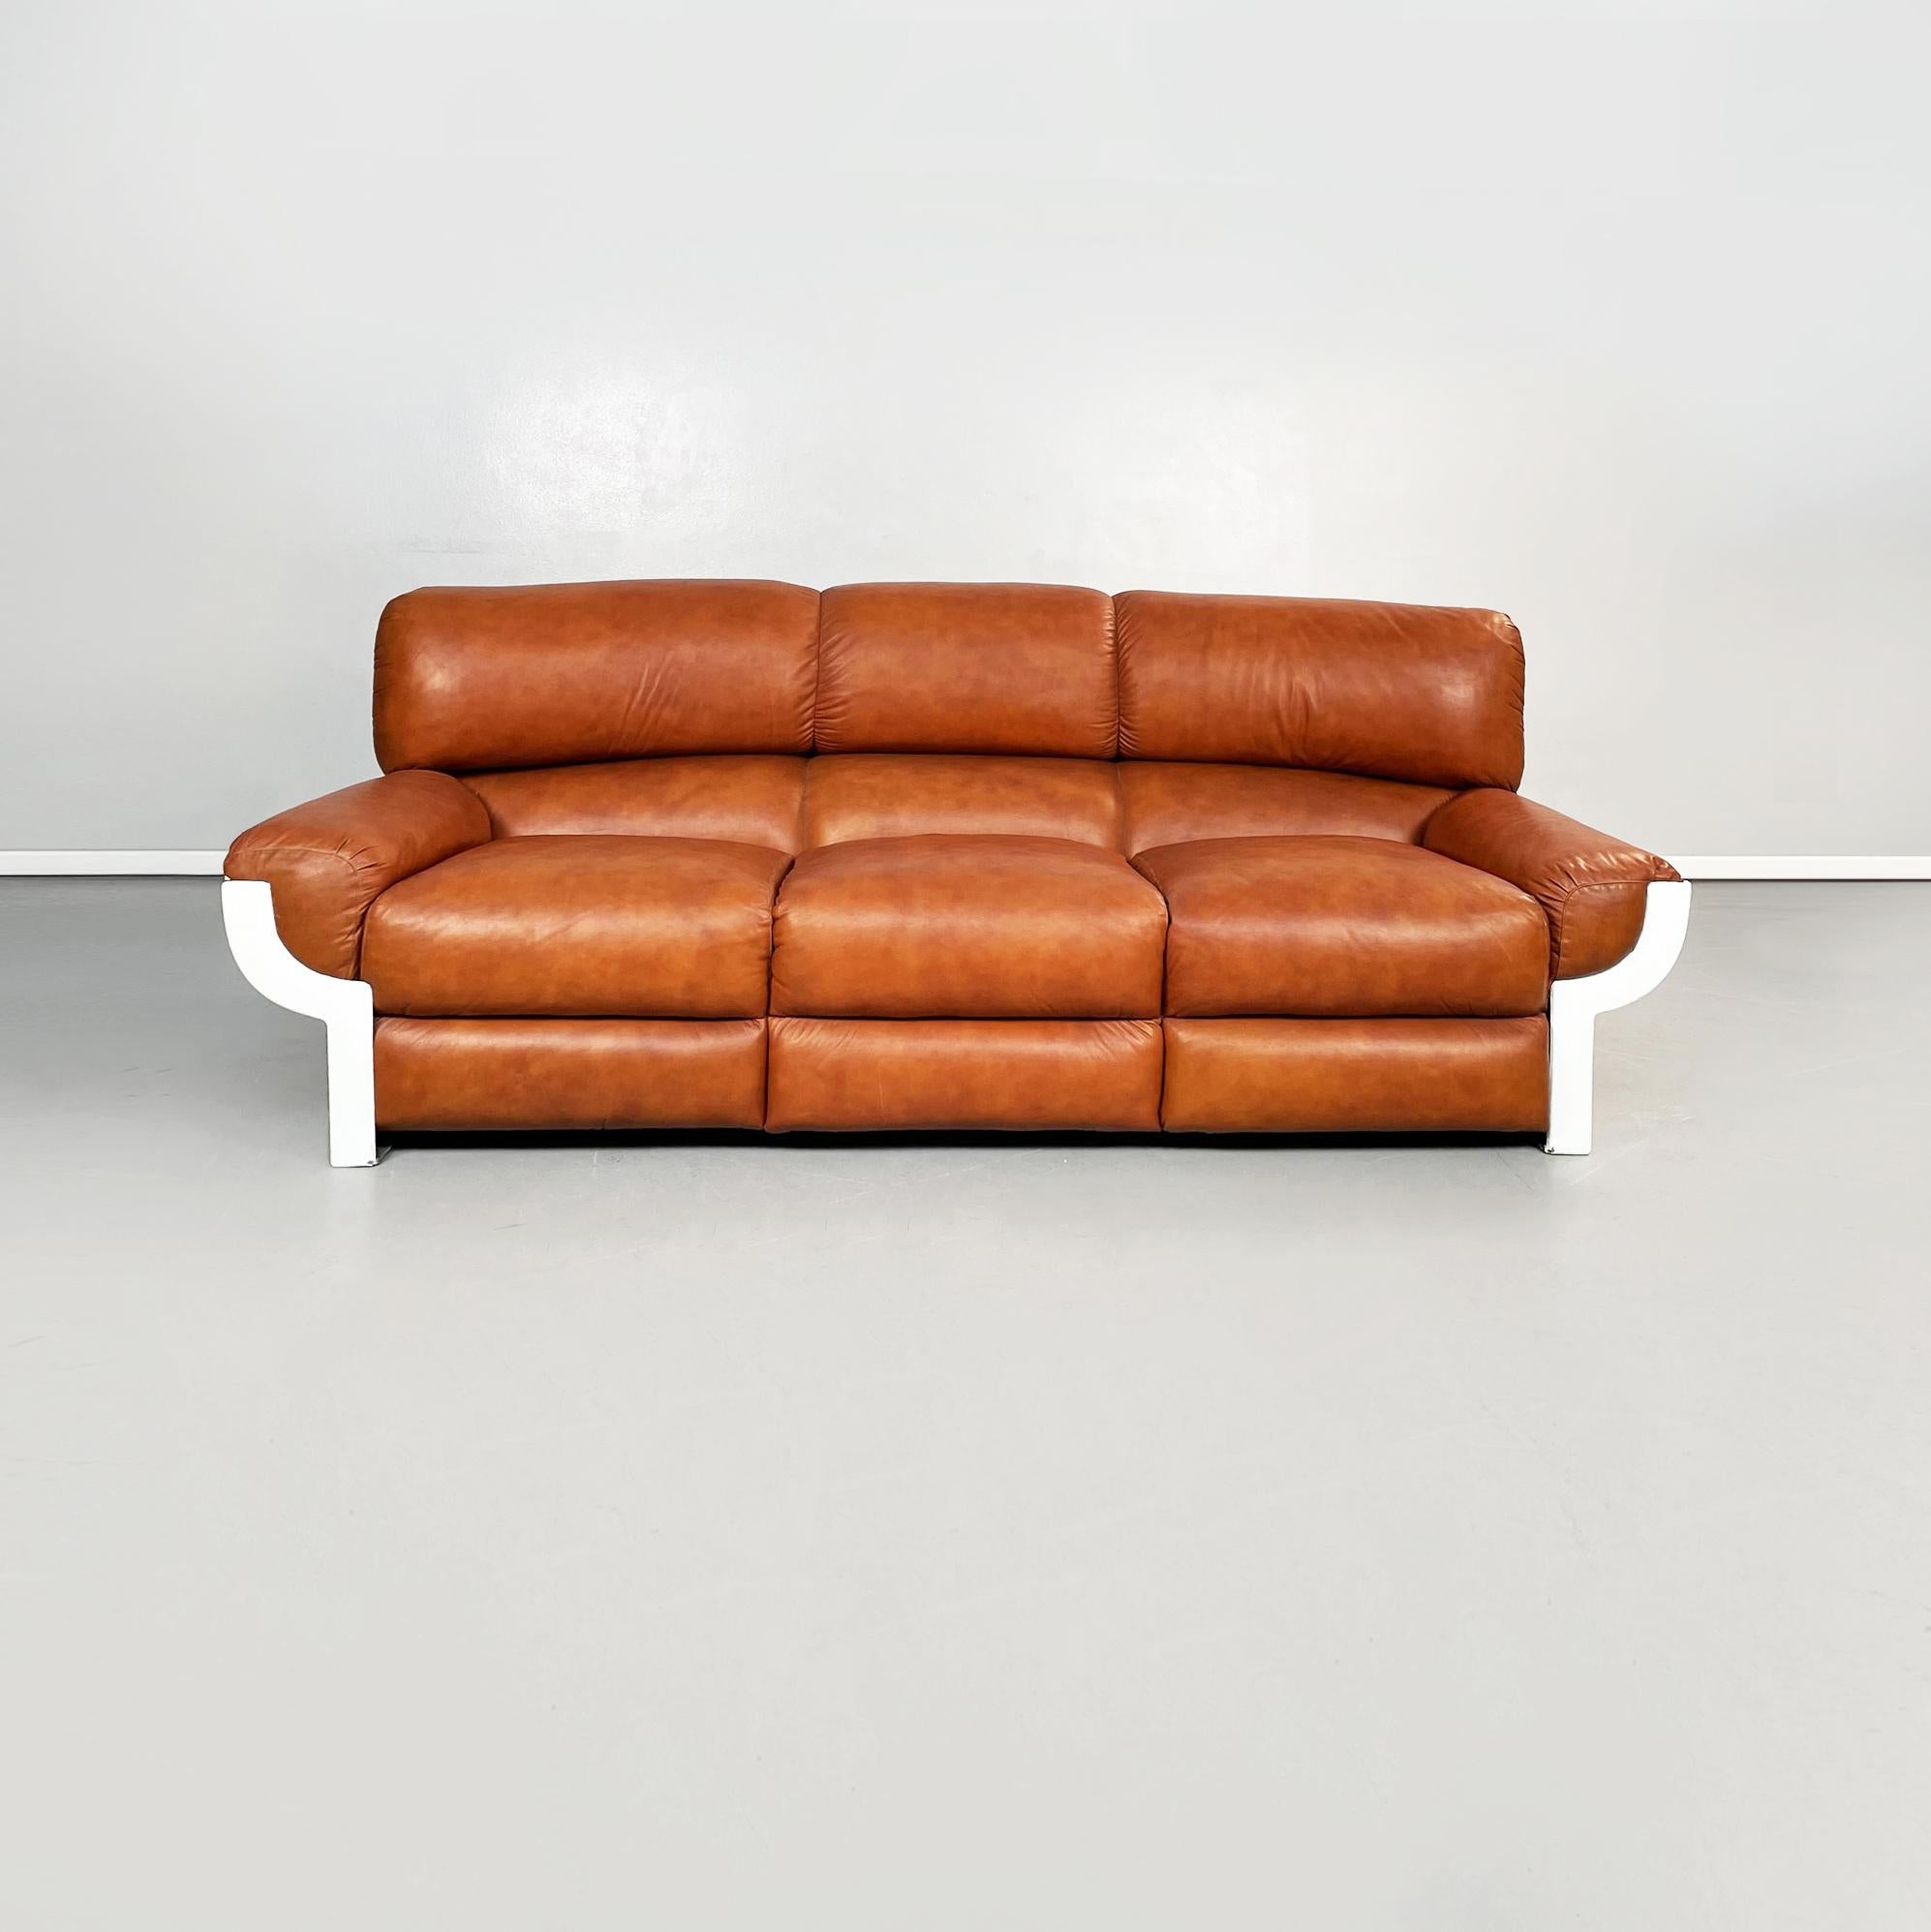 Italian mid-century Brown leather and plastic sofa Flou by Betti for Habitat Ids, 1970s
A three-seater sofa mod. Flou. The rectangular seat is made up of 3 padded cushions covered in cognac brown leather. The backrest, padded and upholstered in